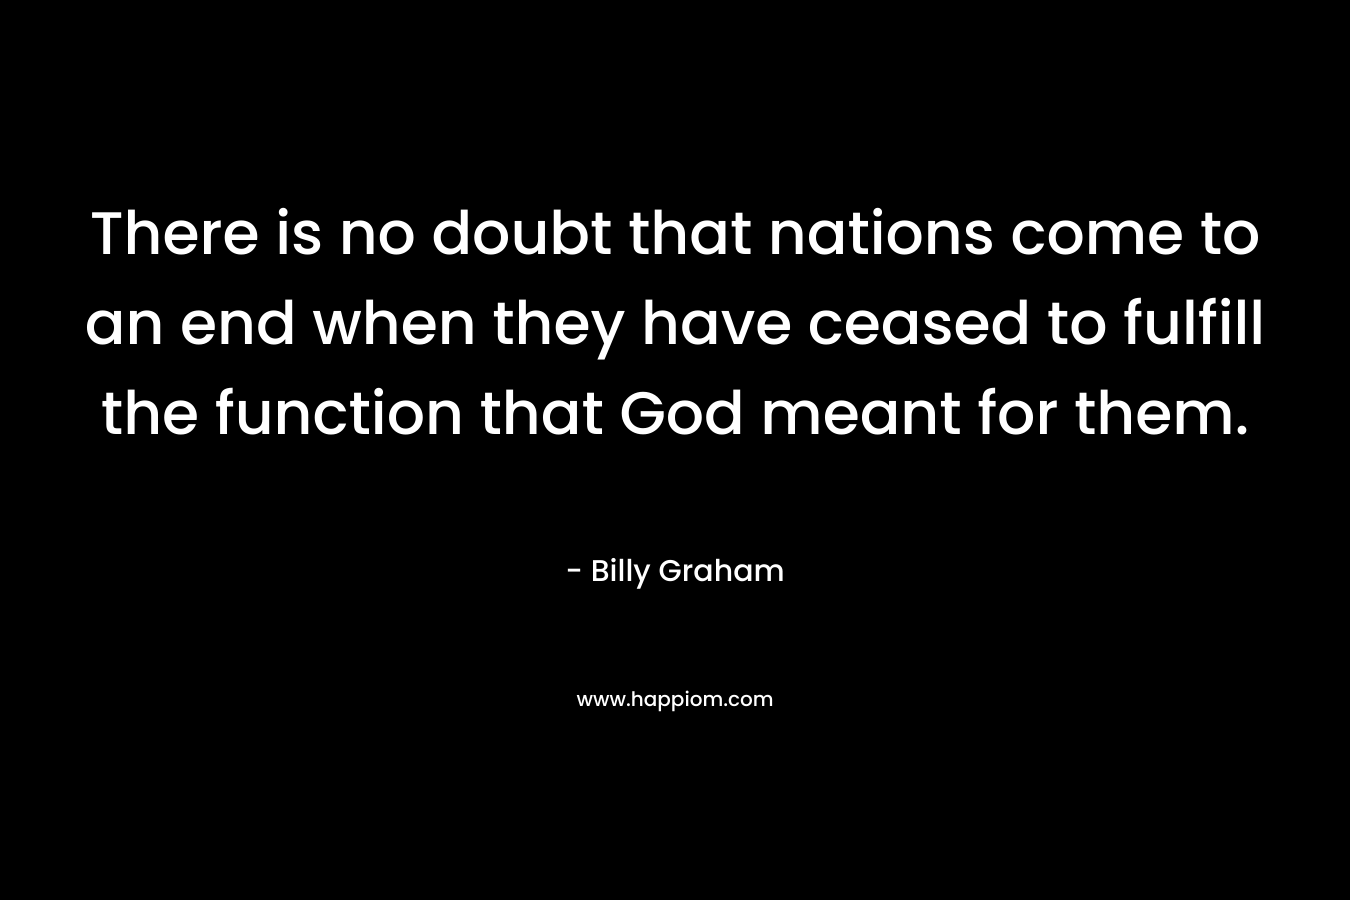 There is no doubt that nations come to an end when they have ceased to fulfill the function that God meant for them. – Billy Graham